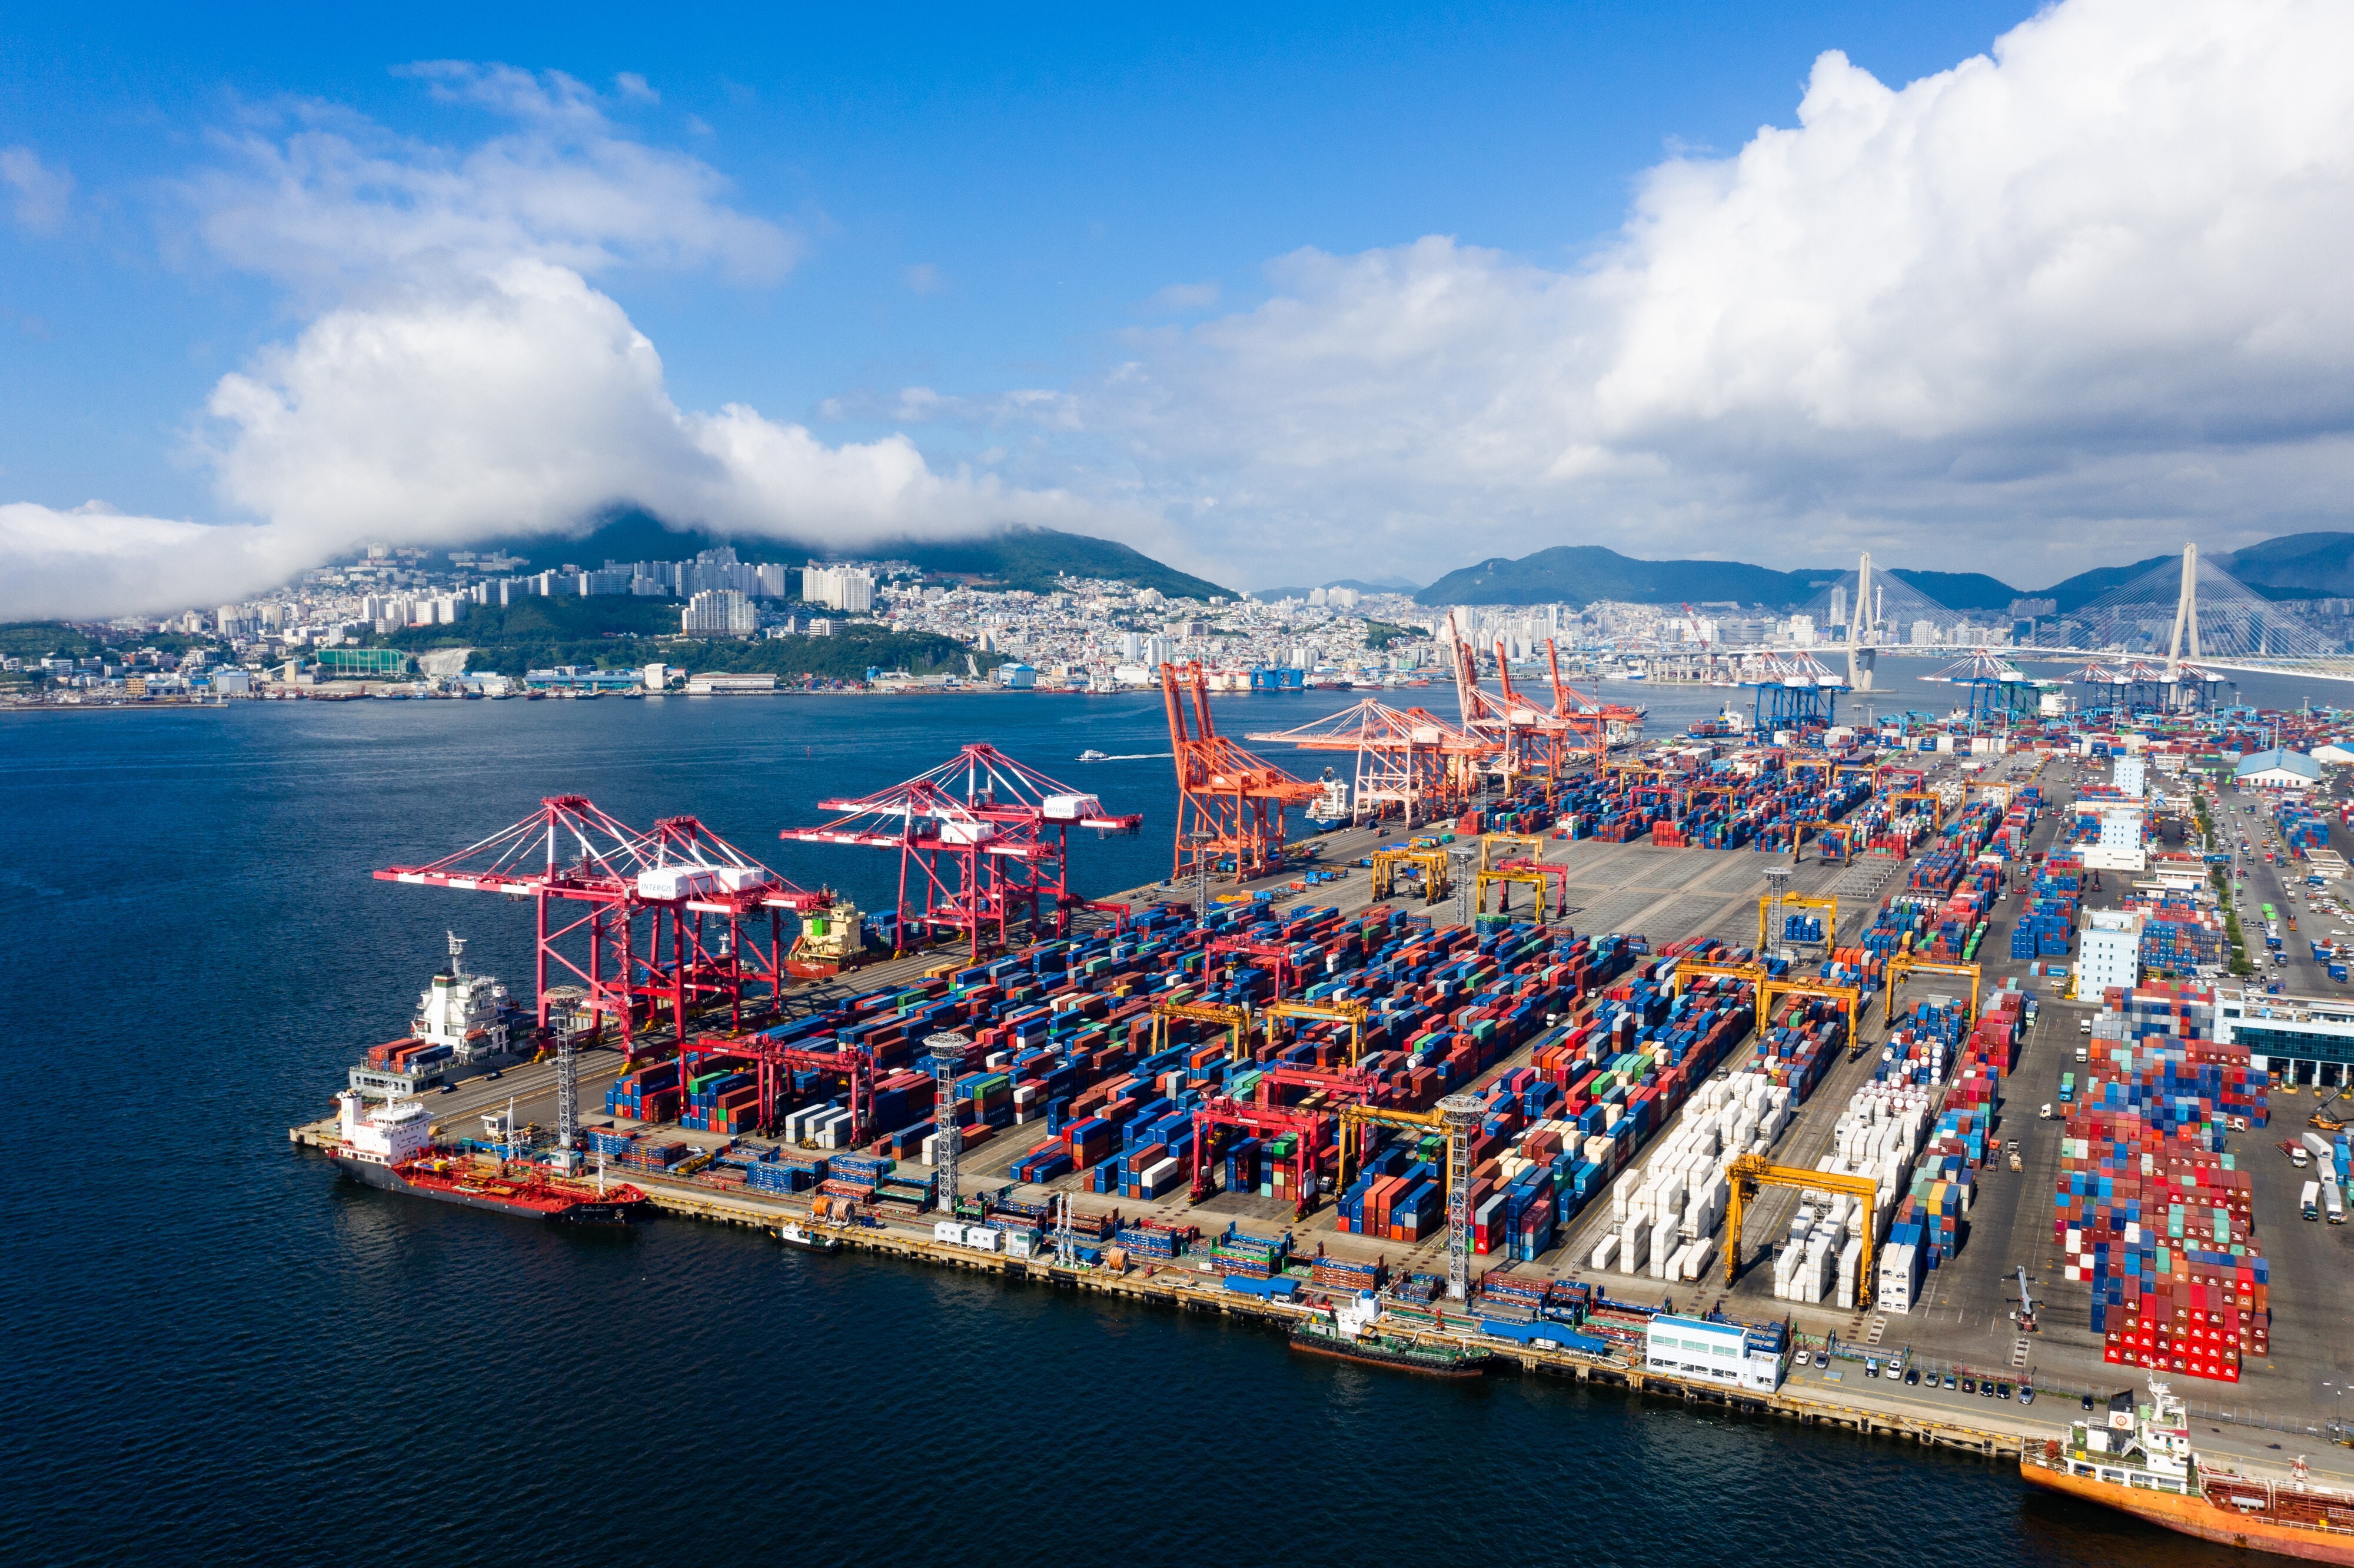 The logistics and industrial sector proved the region’s most resilient in the second quarter. Photo: Bloomberg